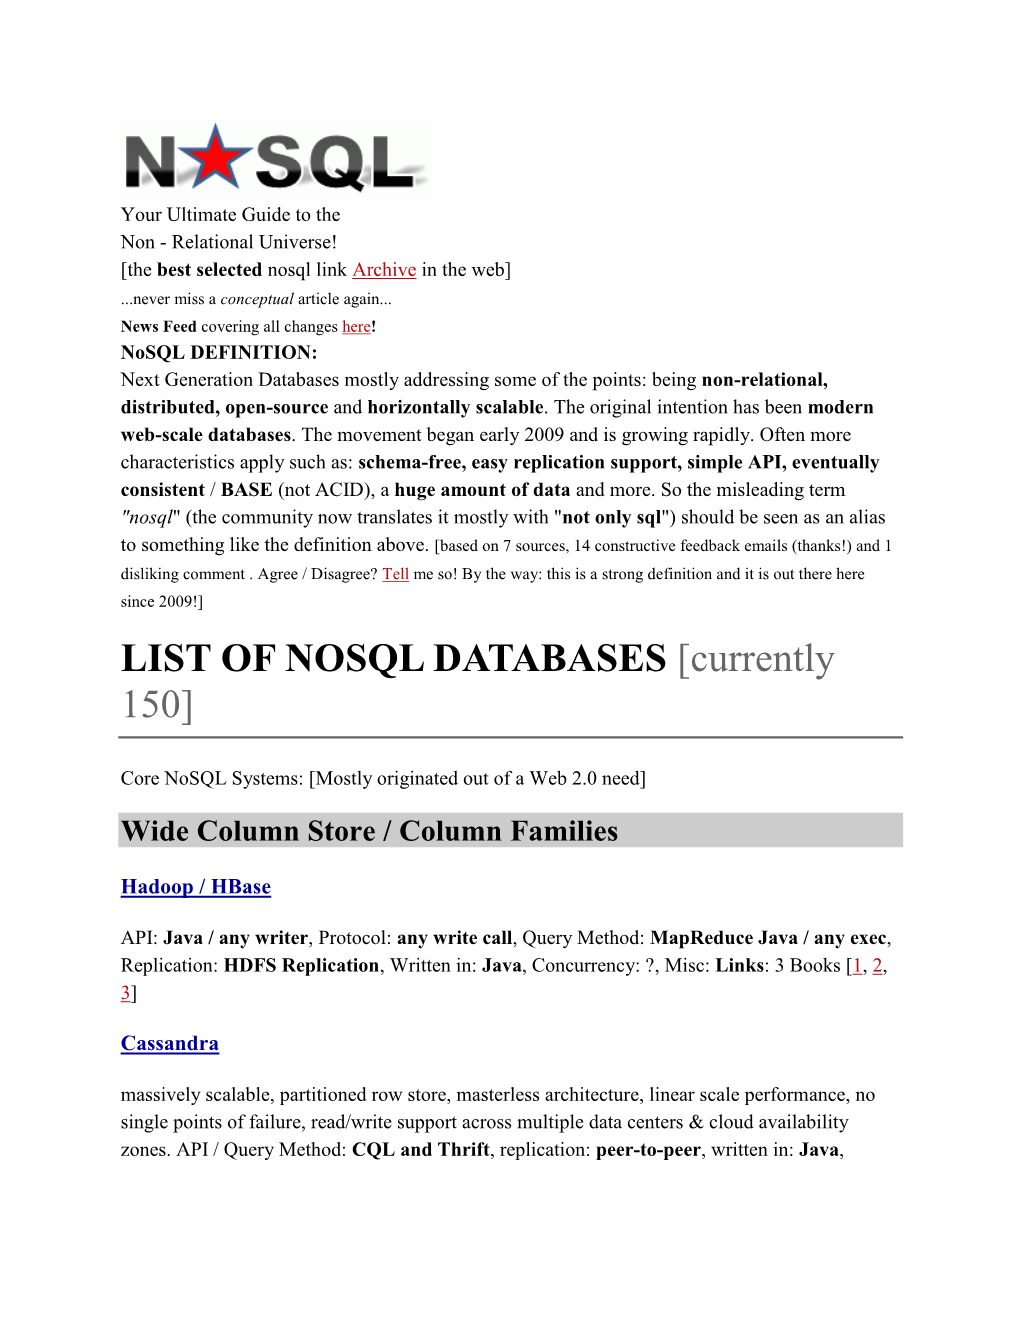 LIST of NOSQL DATABASES [Currently 150]